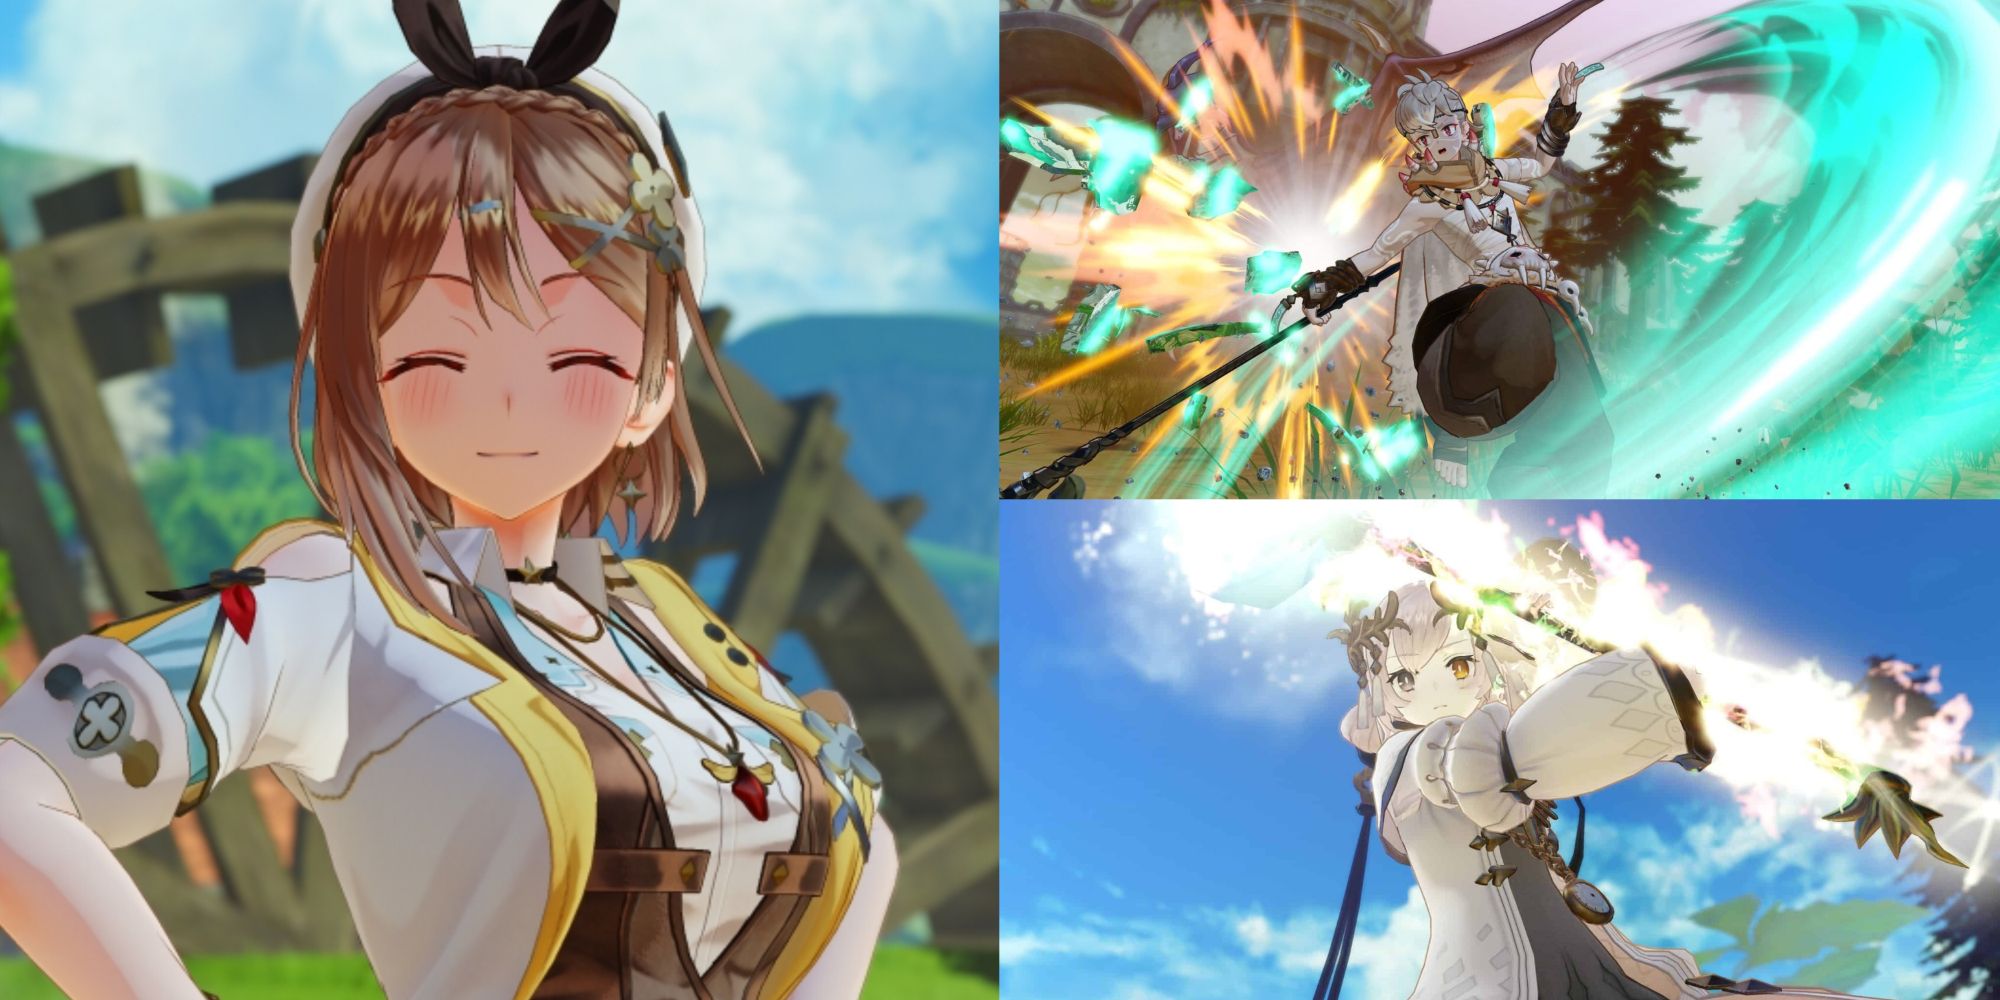 A collage of images from Atelier Ryza 3: Alchemist of the End & the Secret Key. The leftmost is of Ryza smiling while blushing when speaking with one of her party members. The top right is of Dian unleashing a powerful attack with his Axe. The bottom right is of Kala performing a devastating action with their Wand.